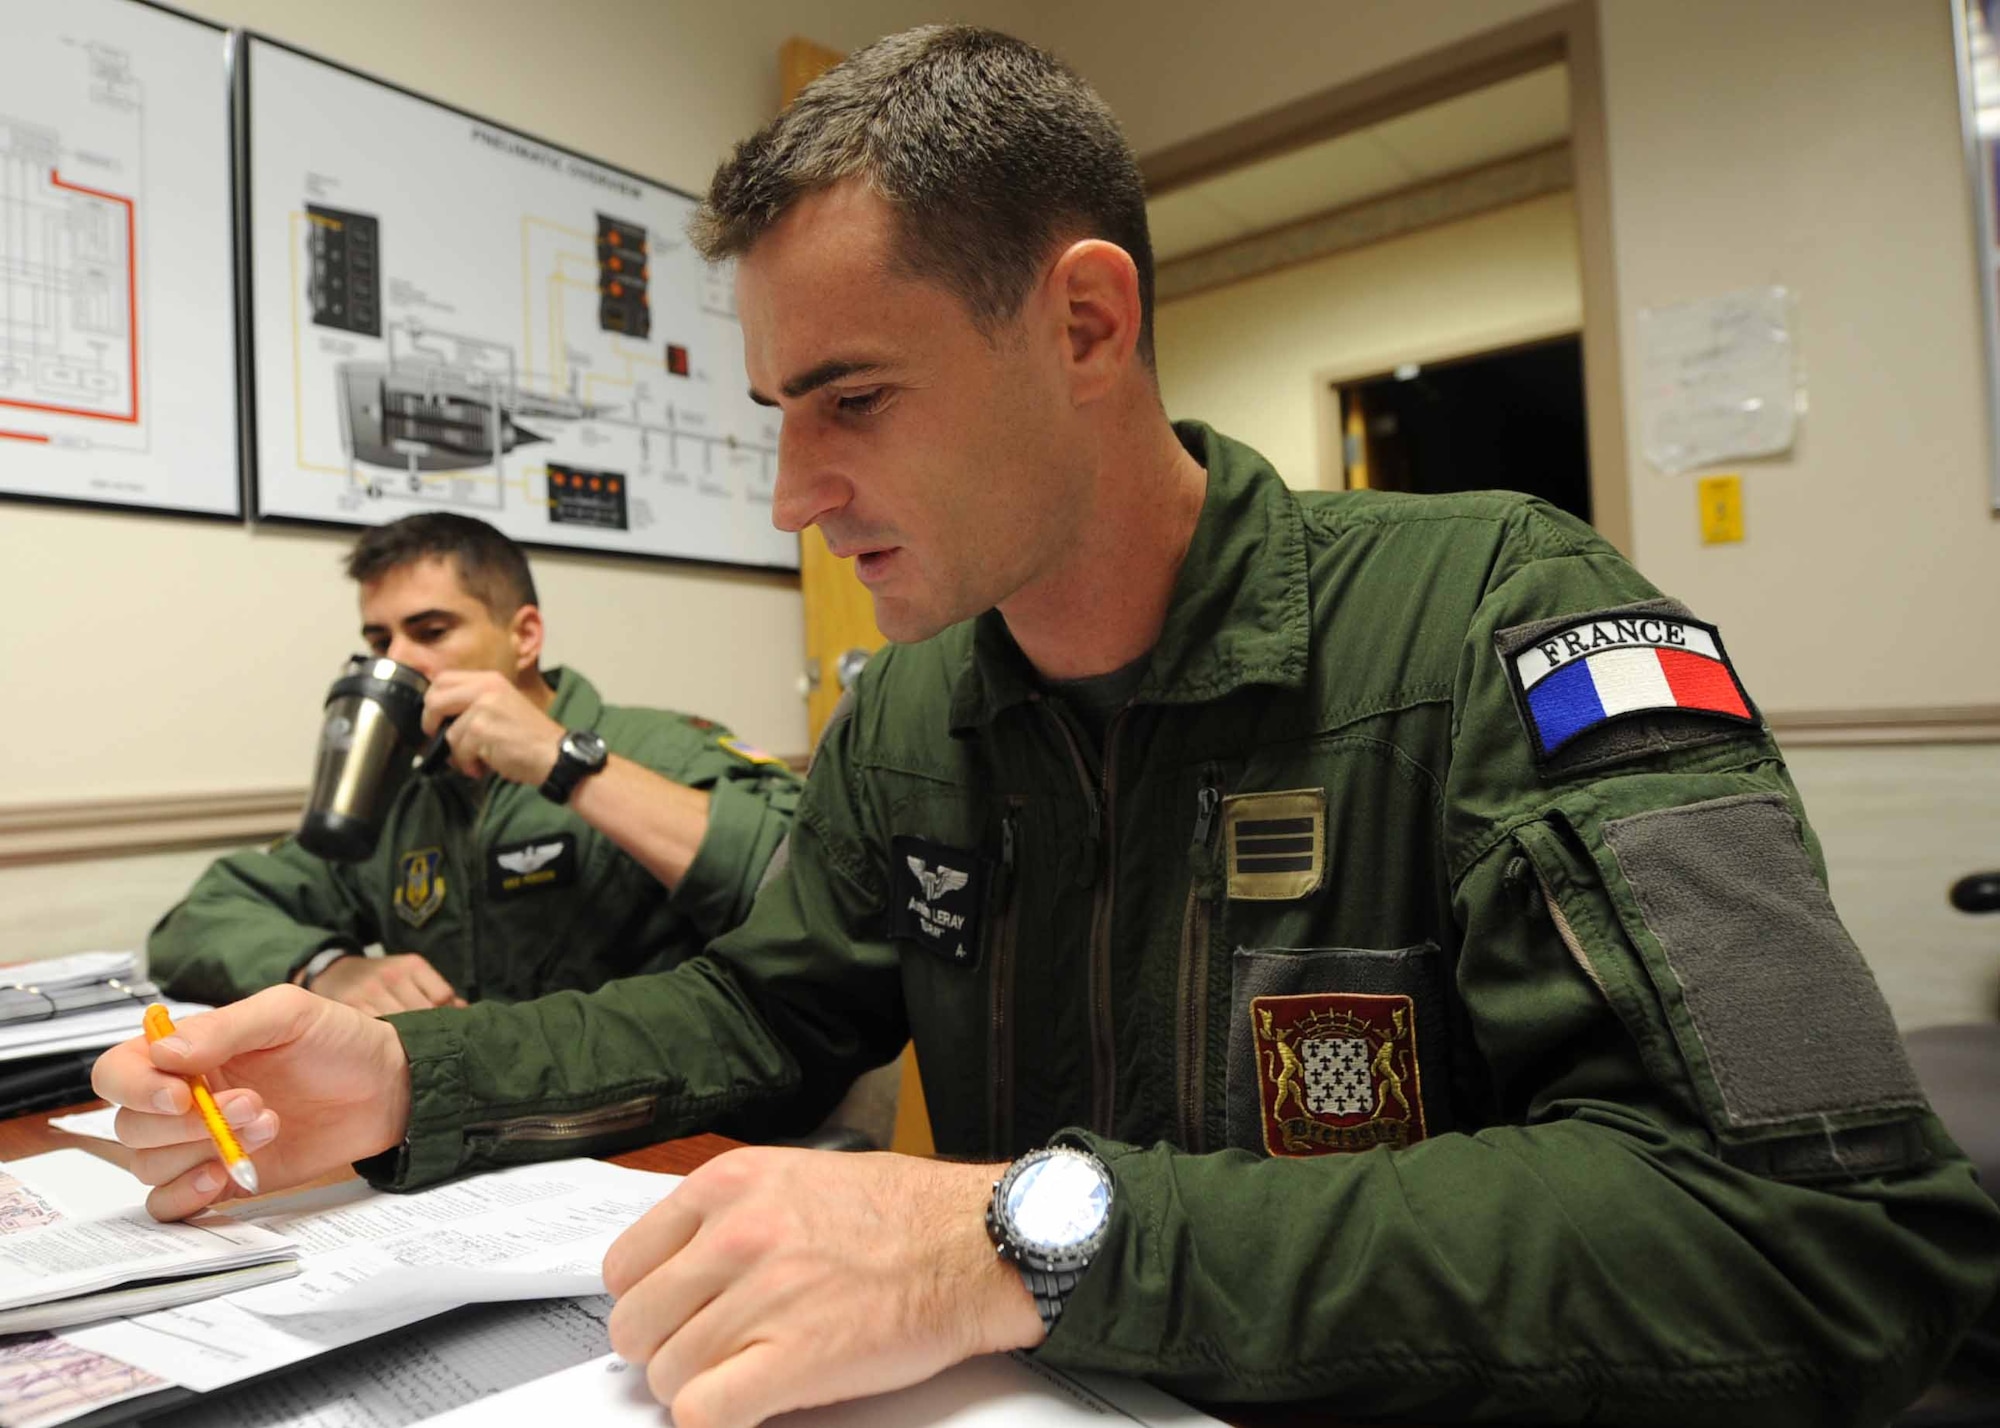 ALTUS AIR FORCE BASE, Okla. – French air force Capt. Aurélien Leray begins his morning by drinking coffee and studying for his upcoming simulated flight Oct. 25, 2013. Leray has more than 1,200 hours of flying experience on the French C-135fr Stratotanker and is now learning the U.S. standards for flying the KC-135 Stratotanker. (U.S. Air Force photo by Senior Airman Levin Boland/Released) 